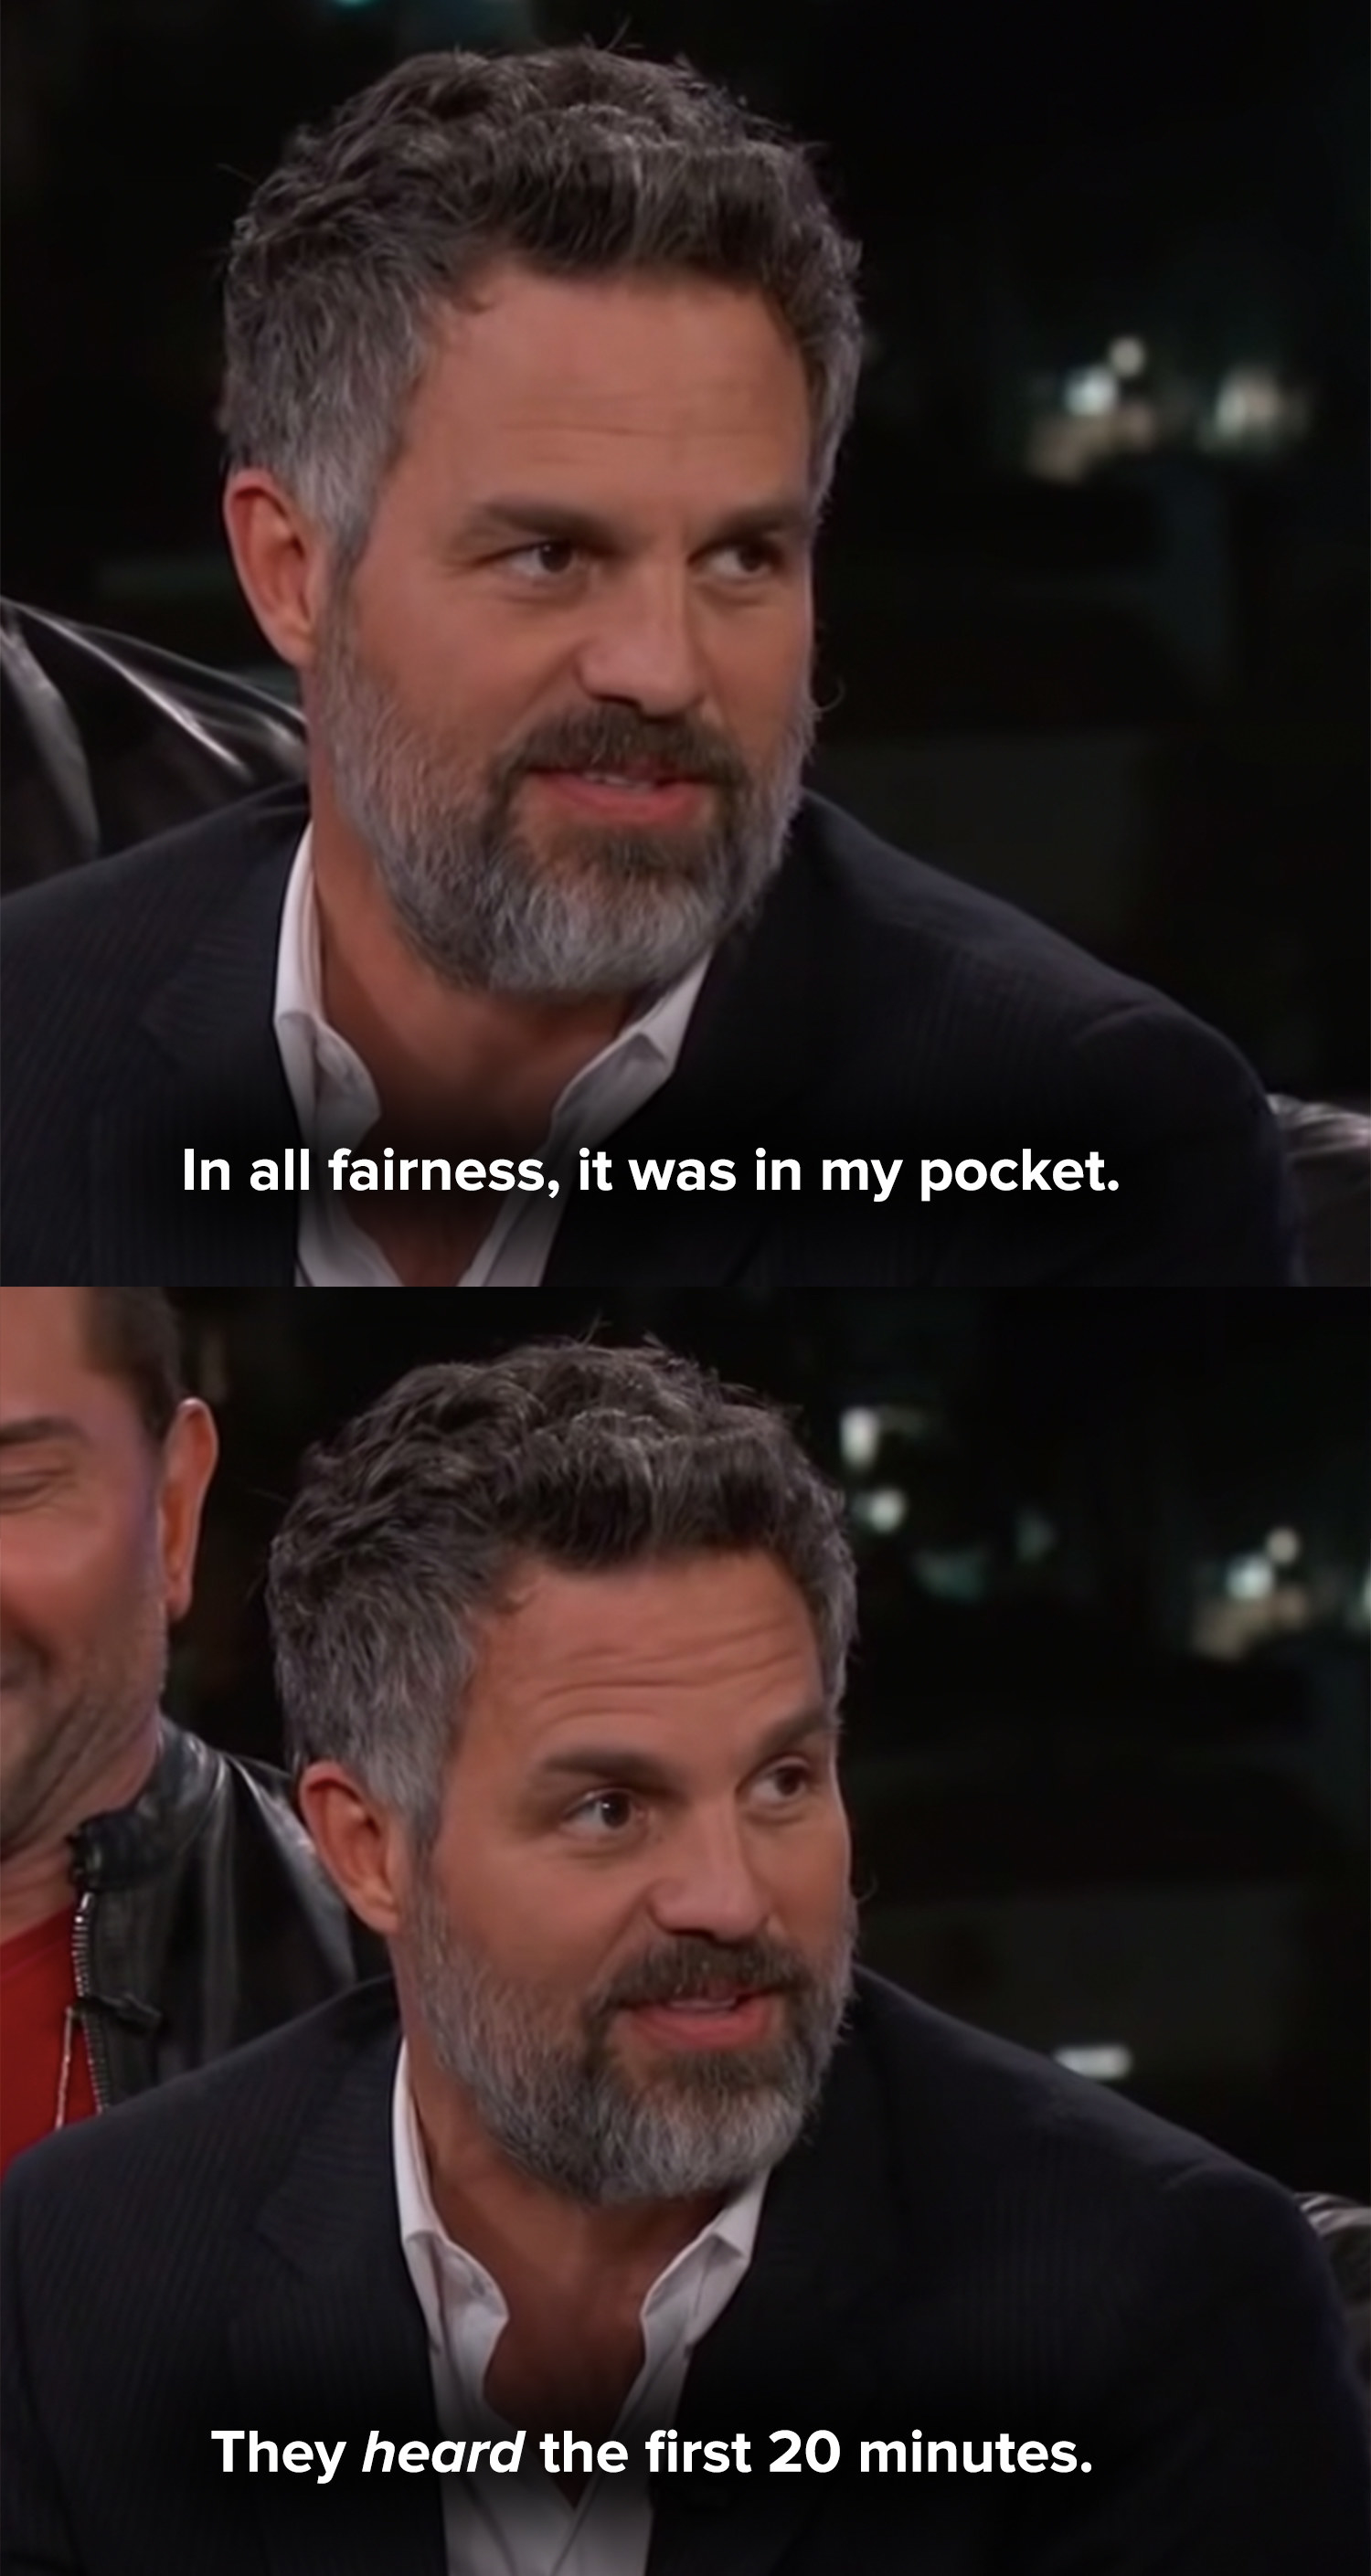 Mark says the phone was in his pocket